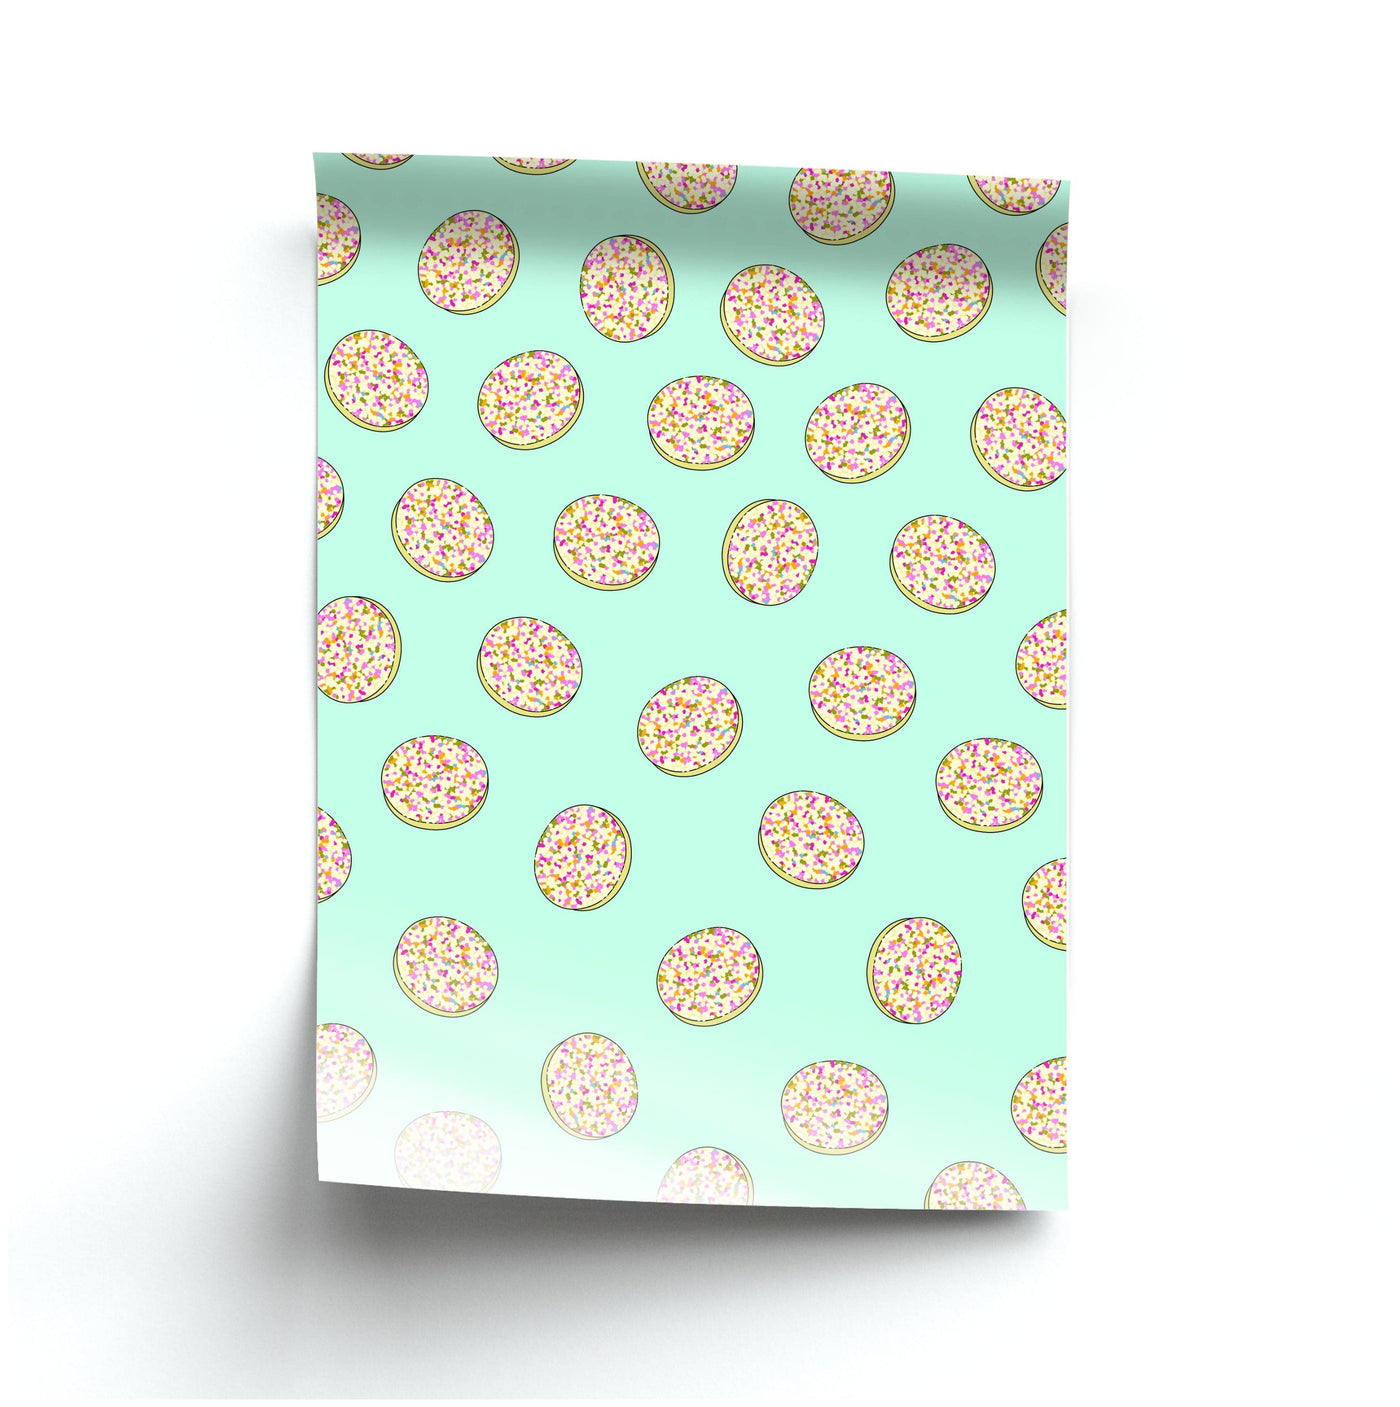 Jazzles - Sweets Patterns Poster